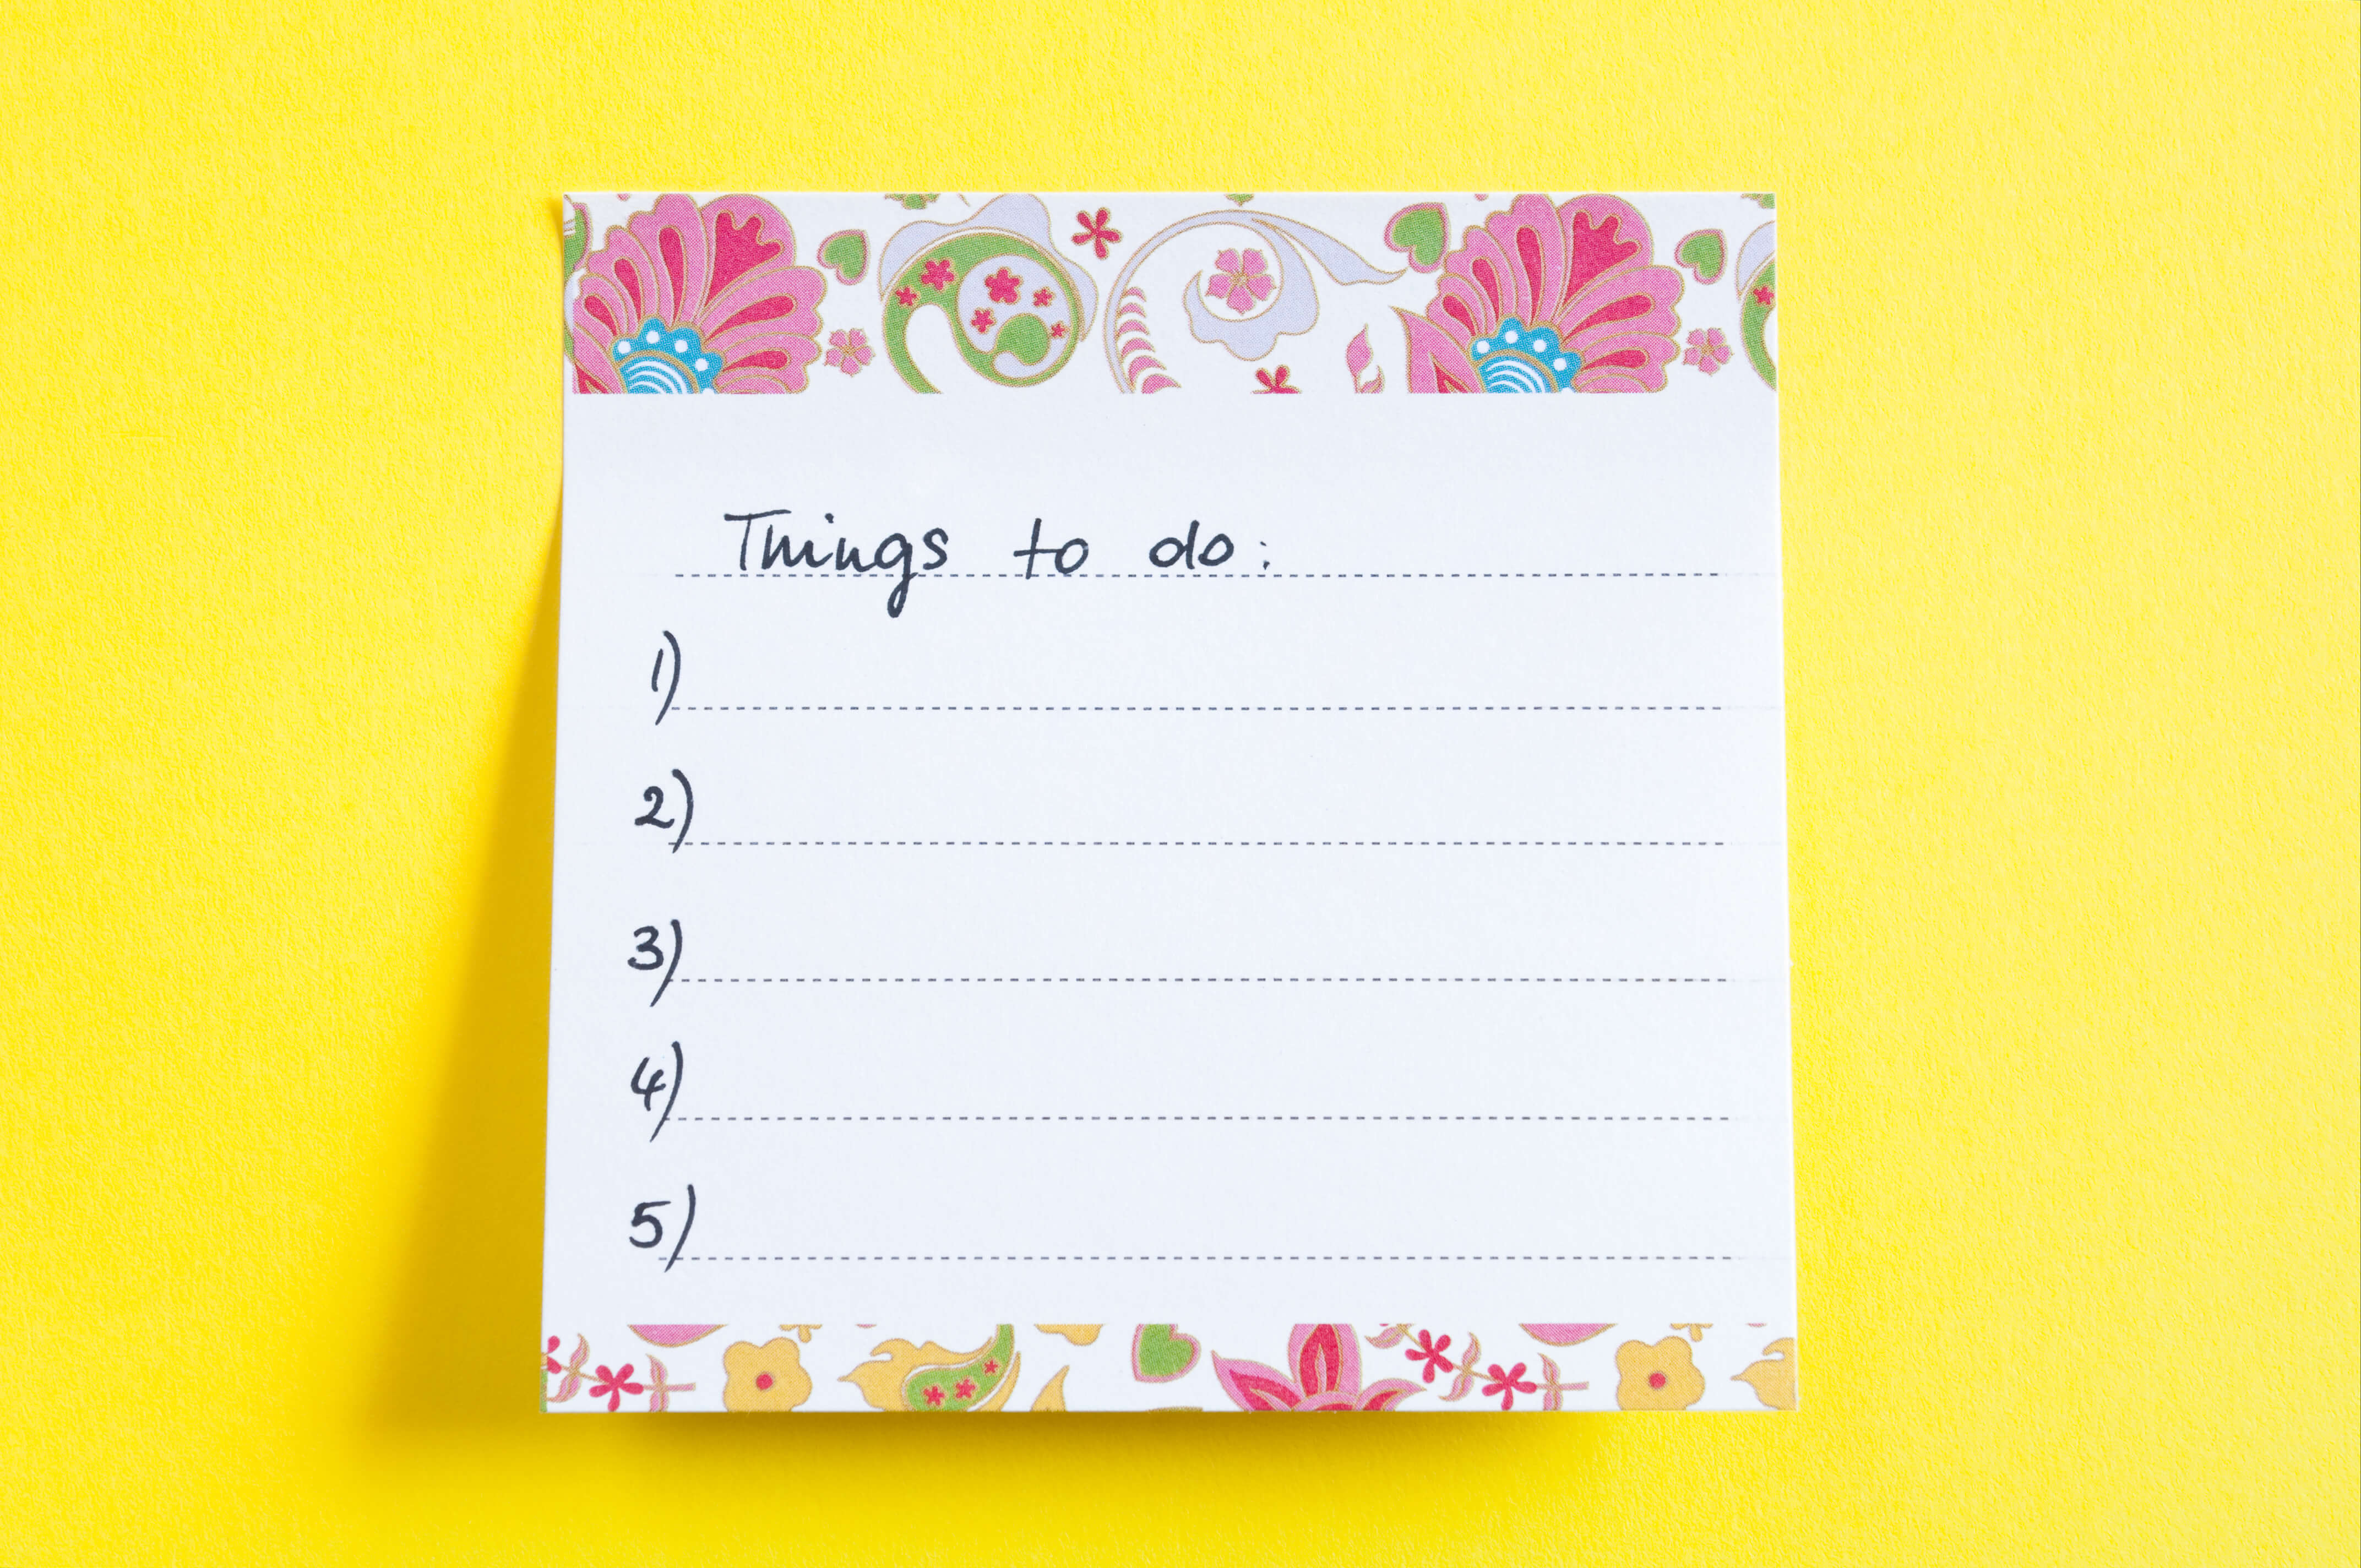 A small post-it note with a paisley floral border is stuck to a yellow background. The words "things to do" are written across the top, with a numbered list of 1 through 5 on each line.